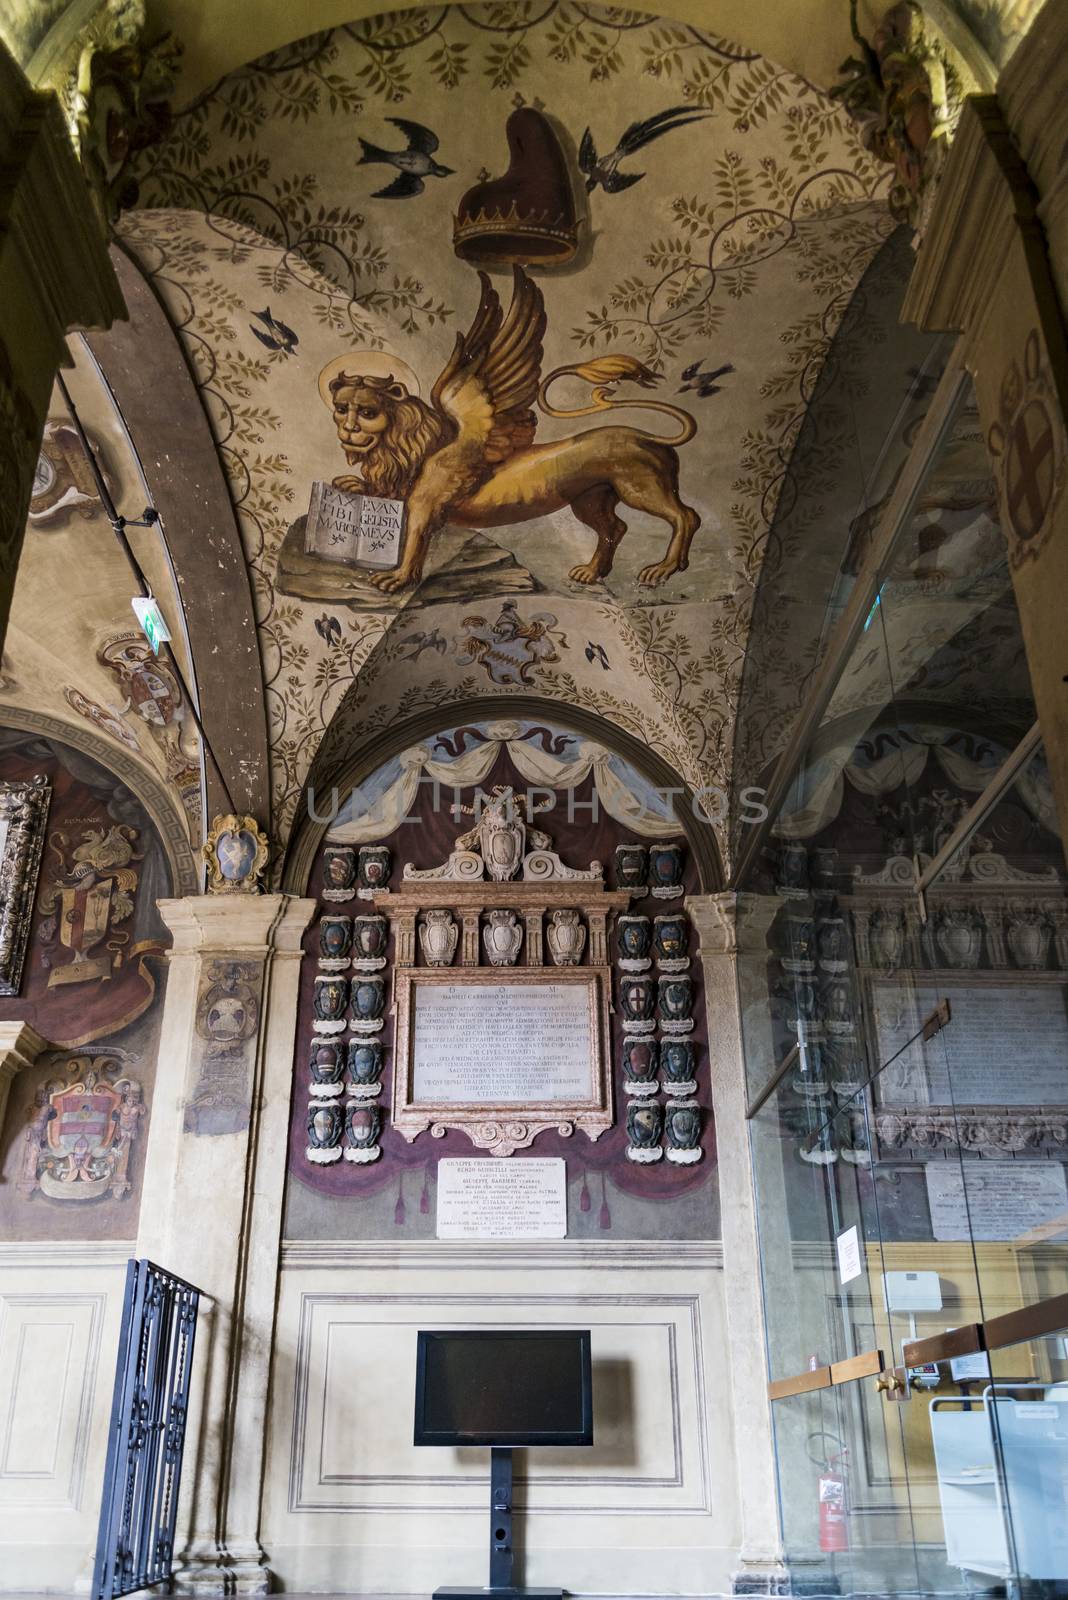 Decorations on the wall and the portico in Archiginnasio library of Bologna. It is one of the most important building on June 25, 2017 in Bologna, Italy.